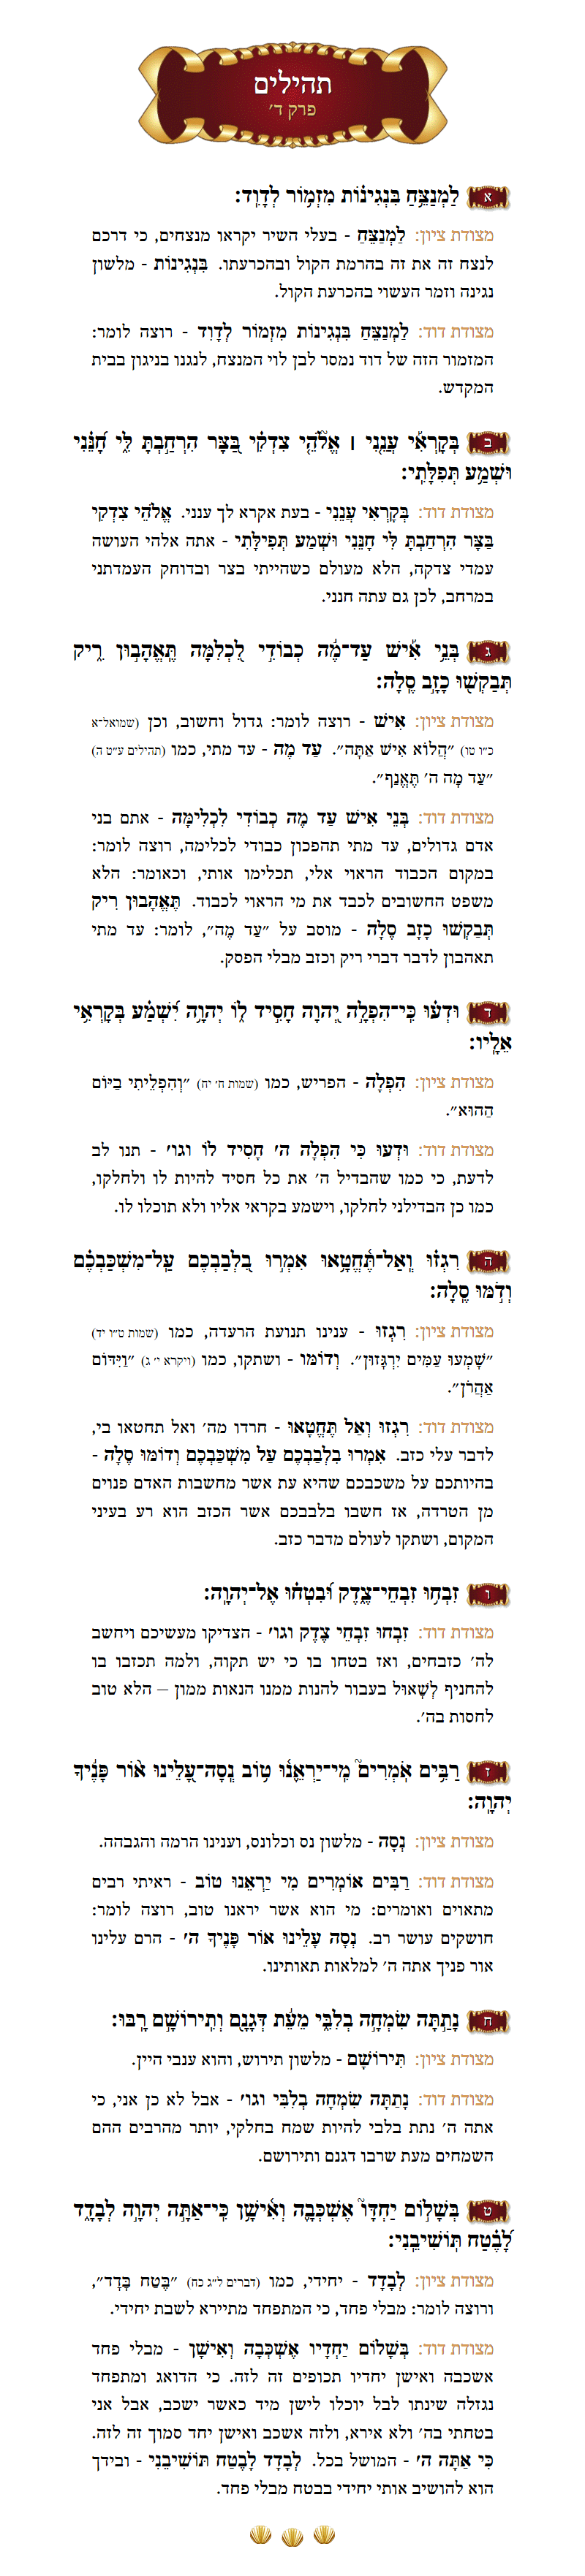 Sefer Tehillim Chapter 40 with commentary